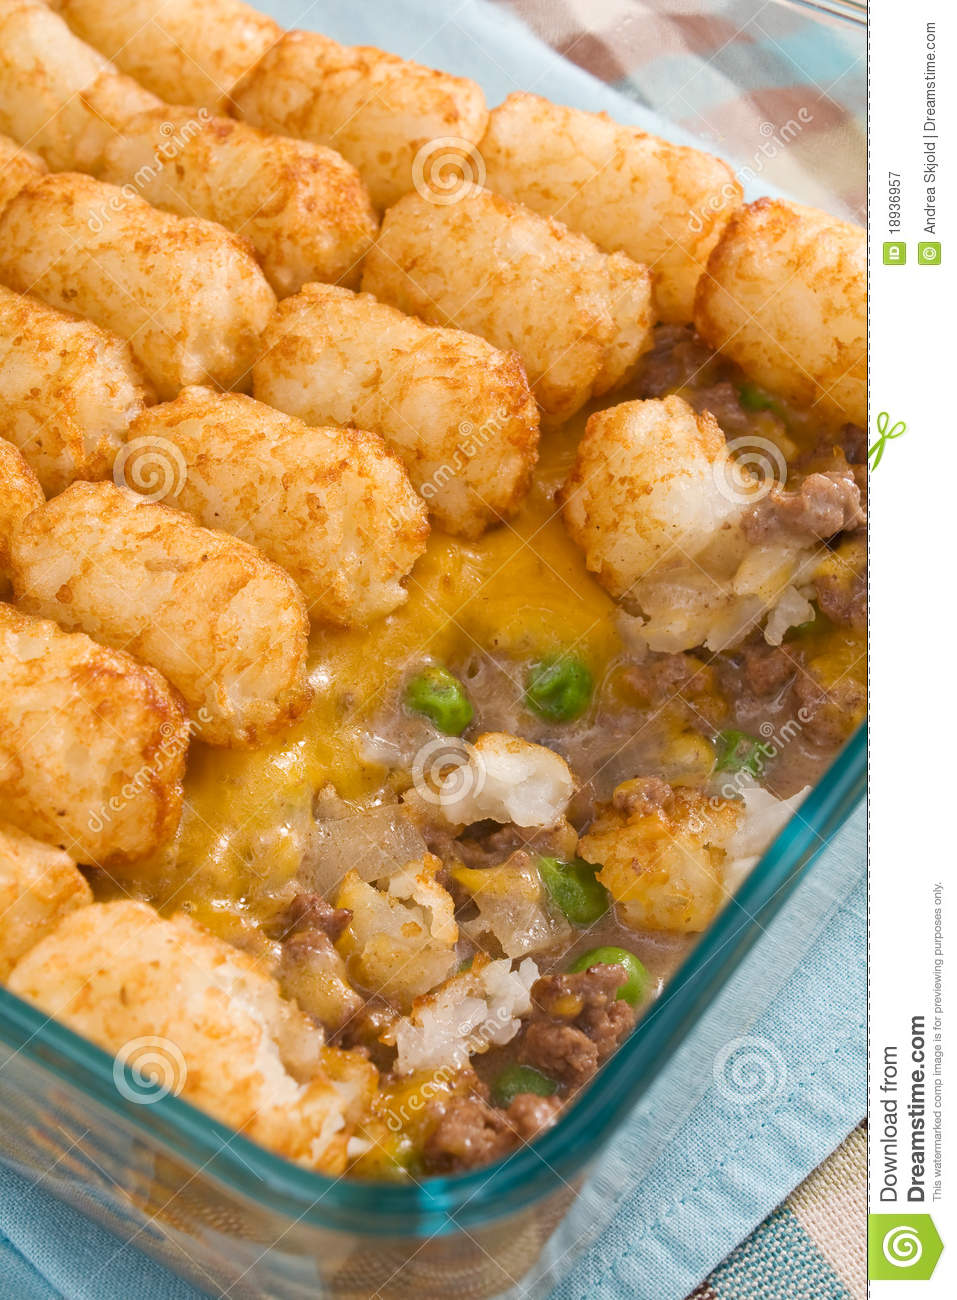 Tater Tot Casserole Royalty Free Stock Photography   Image  18936957